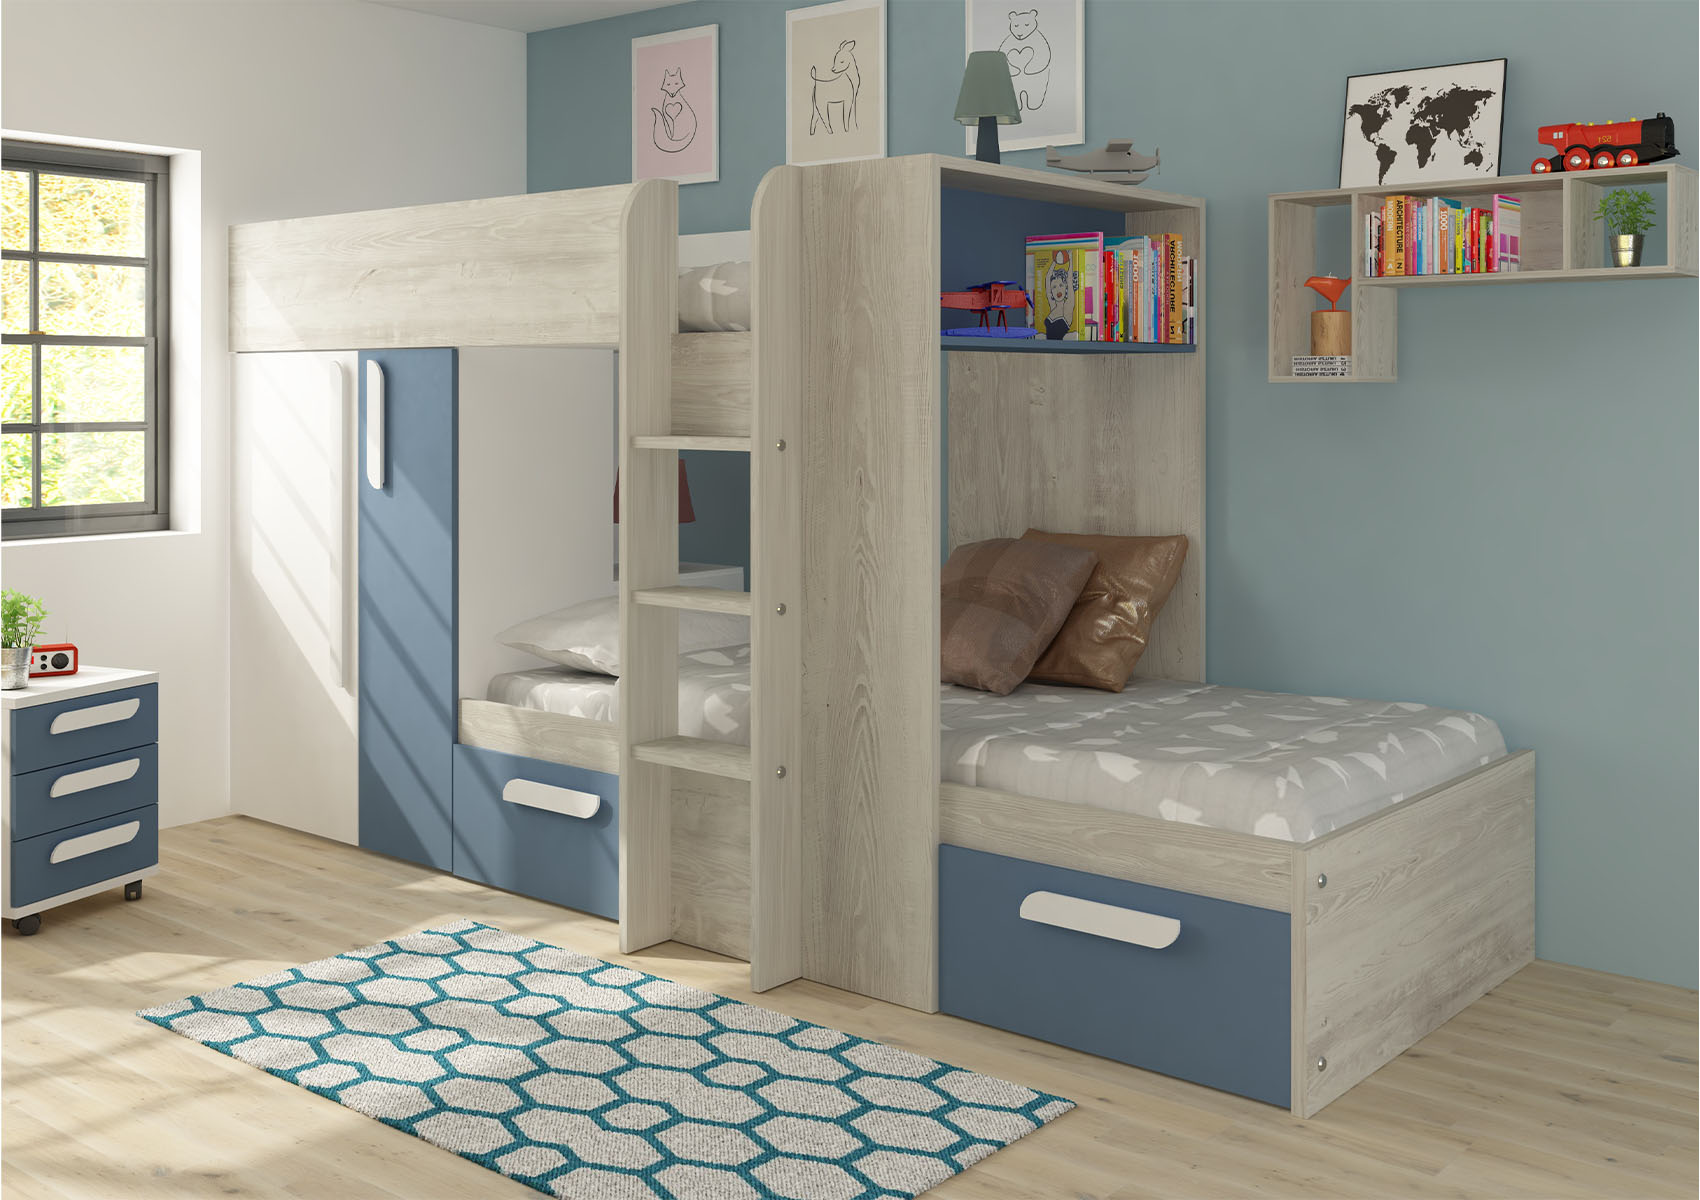 View Barca Blue Bunkbed Bed Frame Time4Sleep information